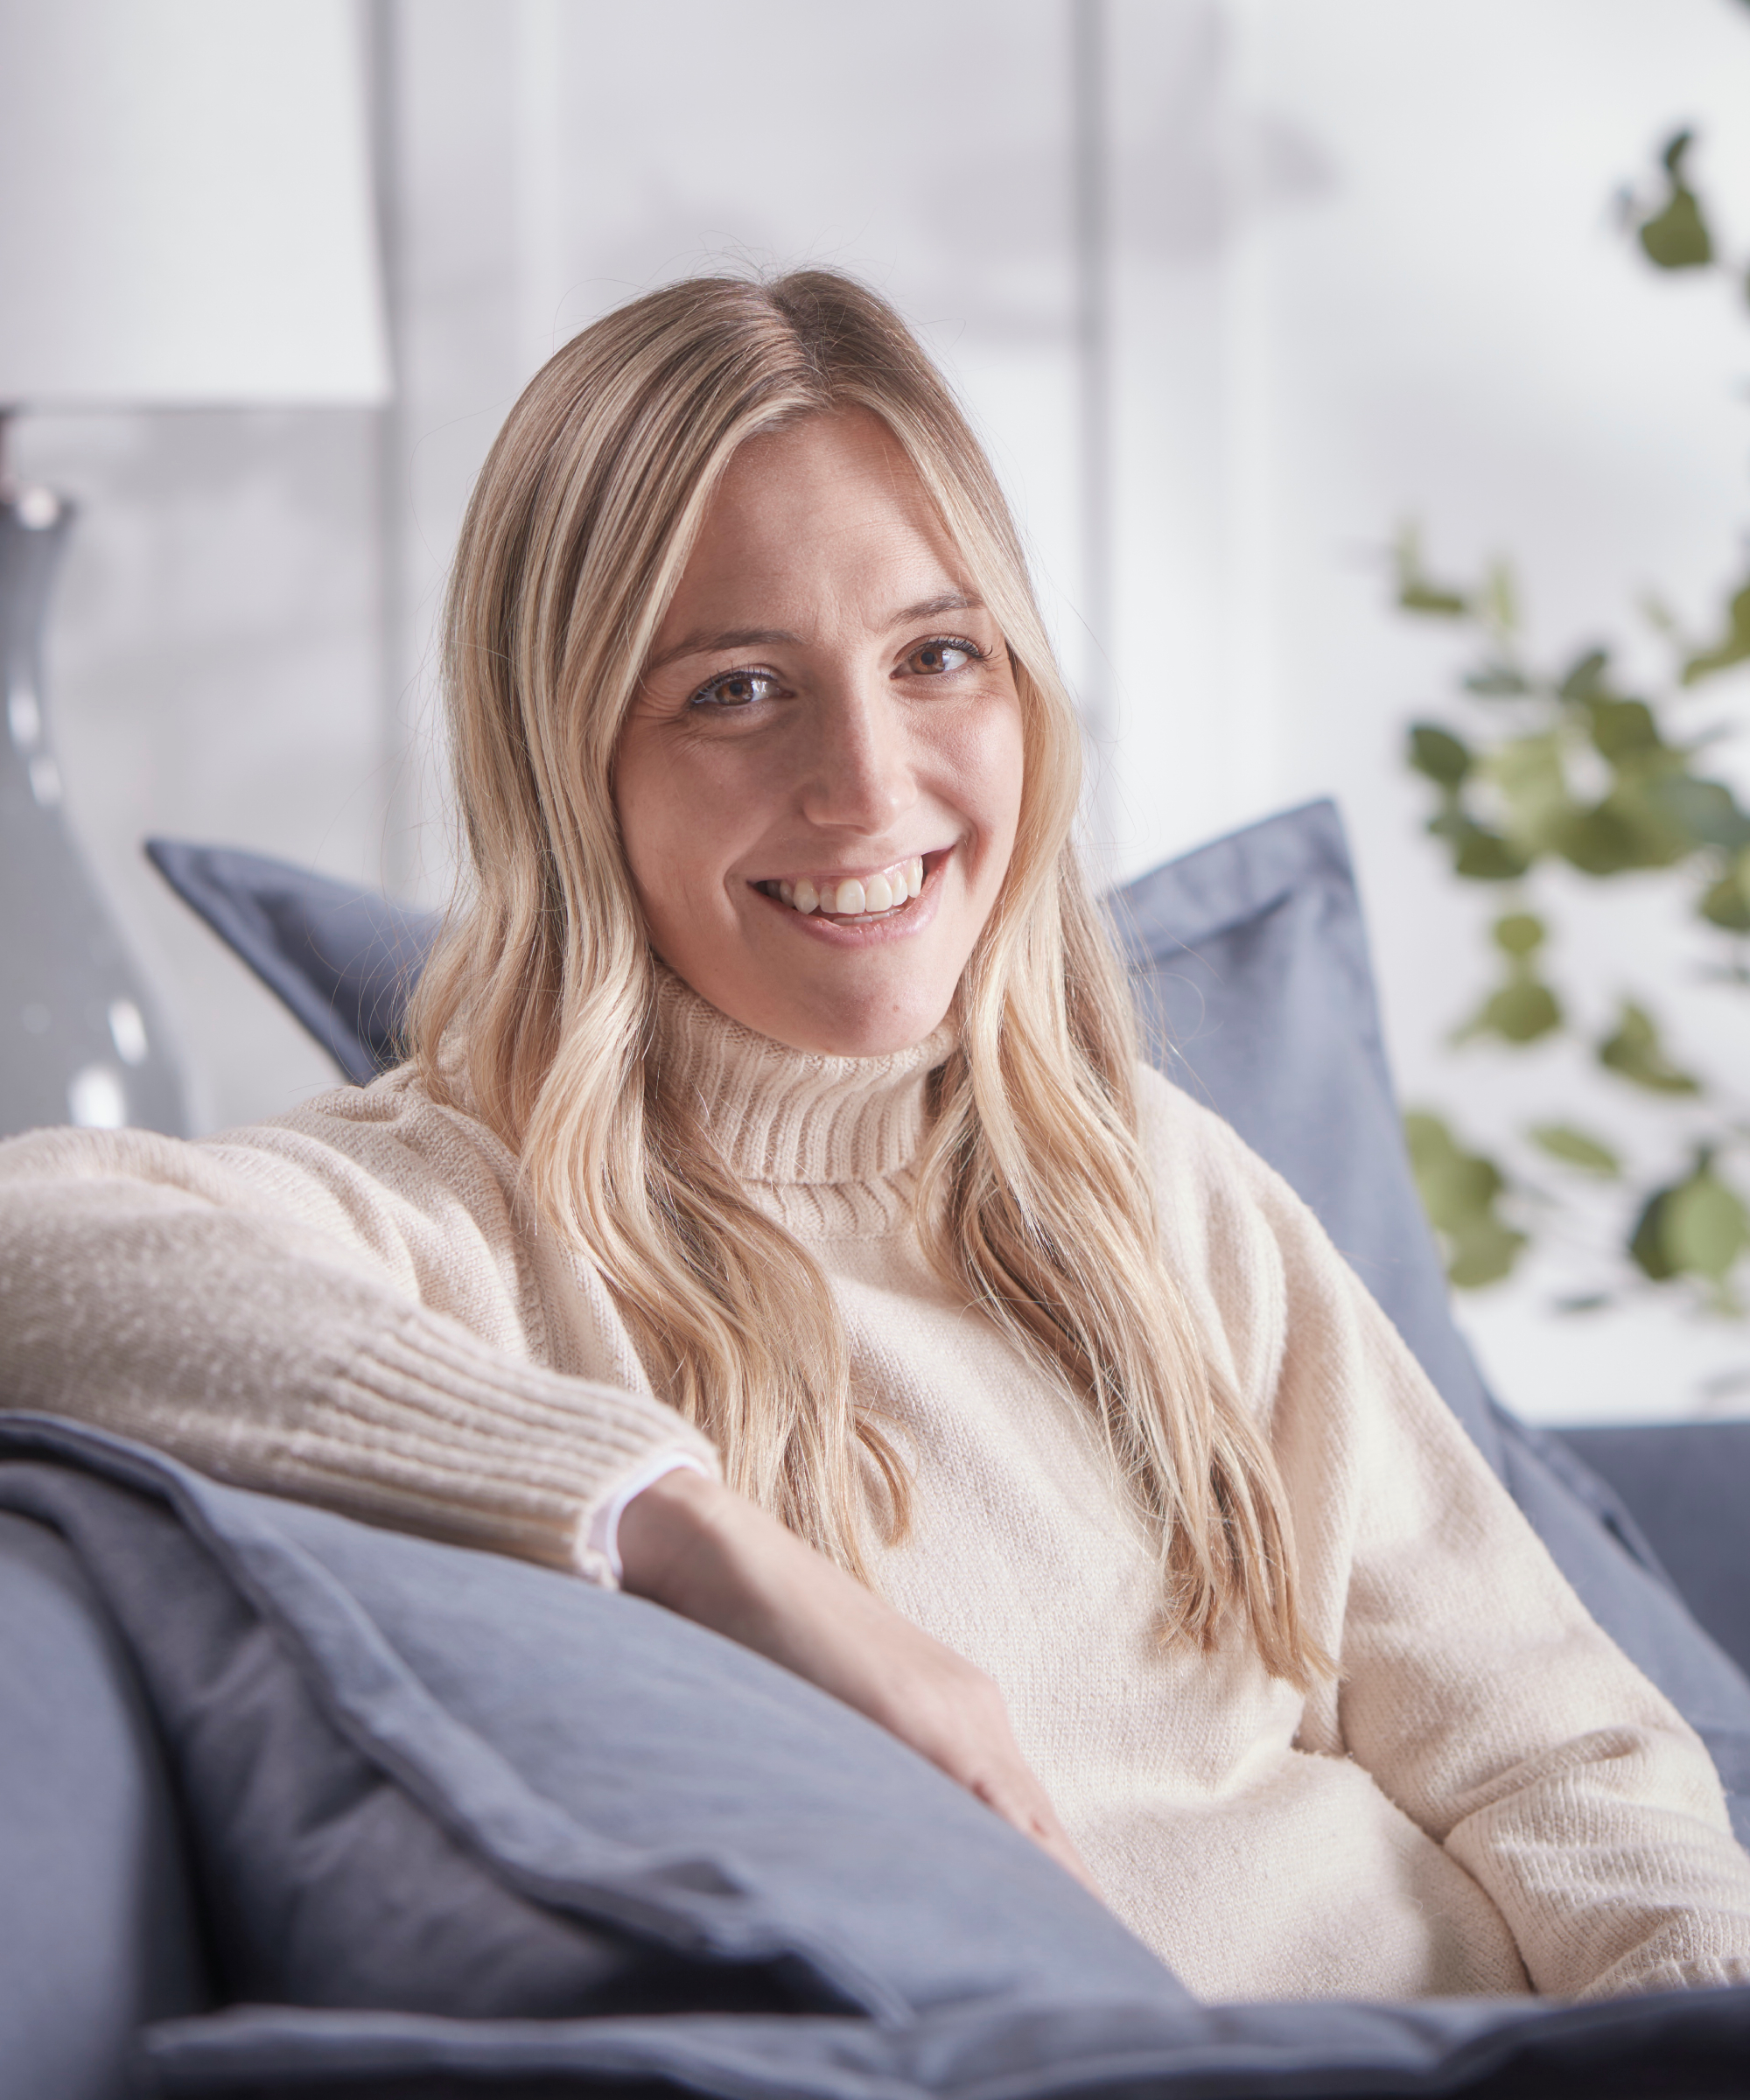 headshot of female sat on sofa with long blond hair wearing cream jumper